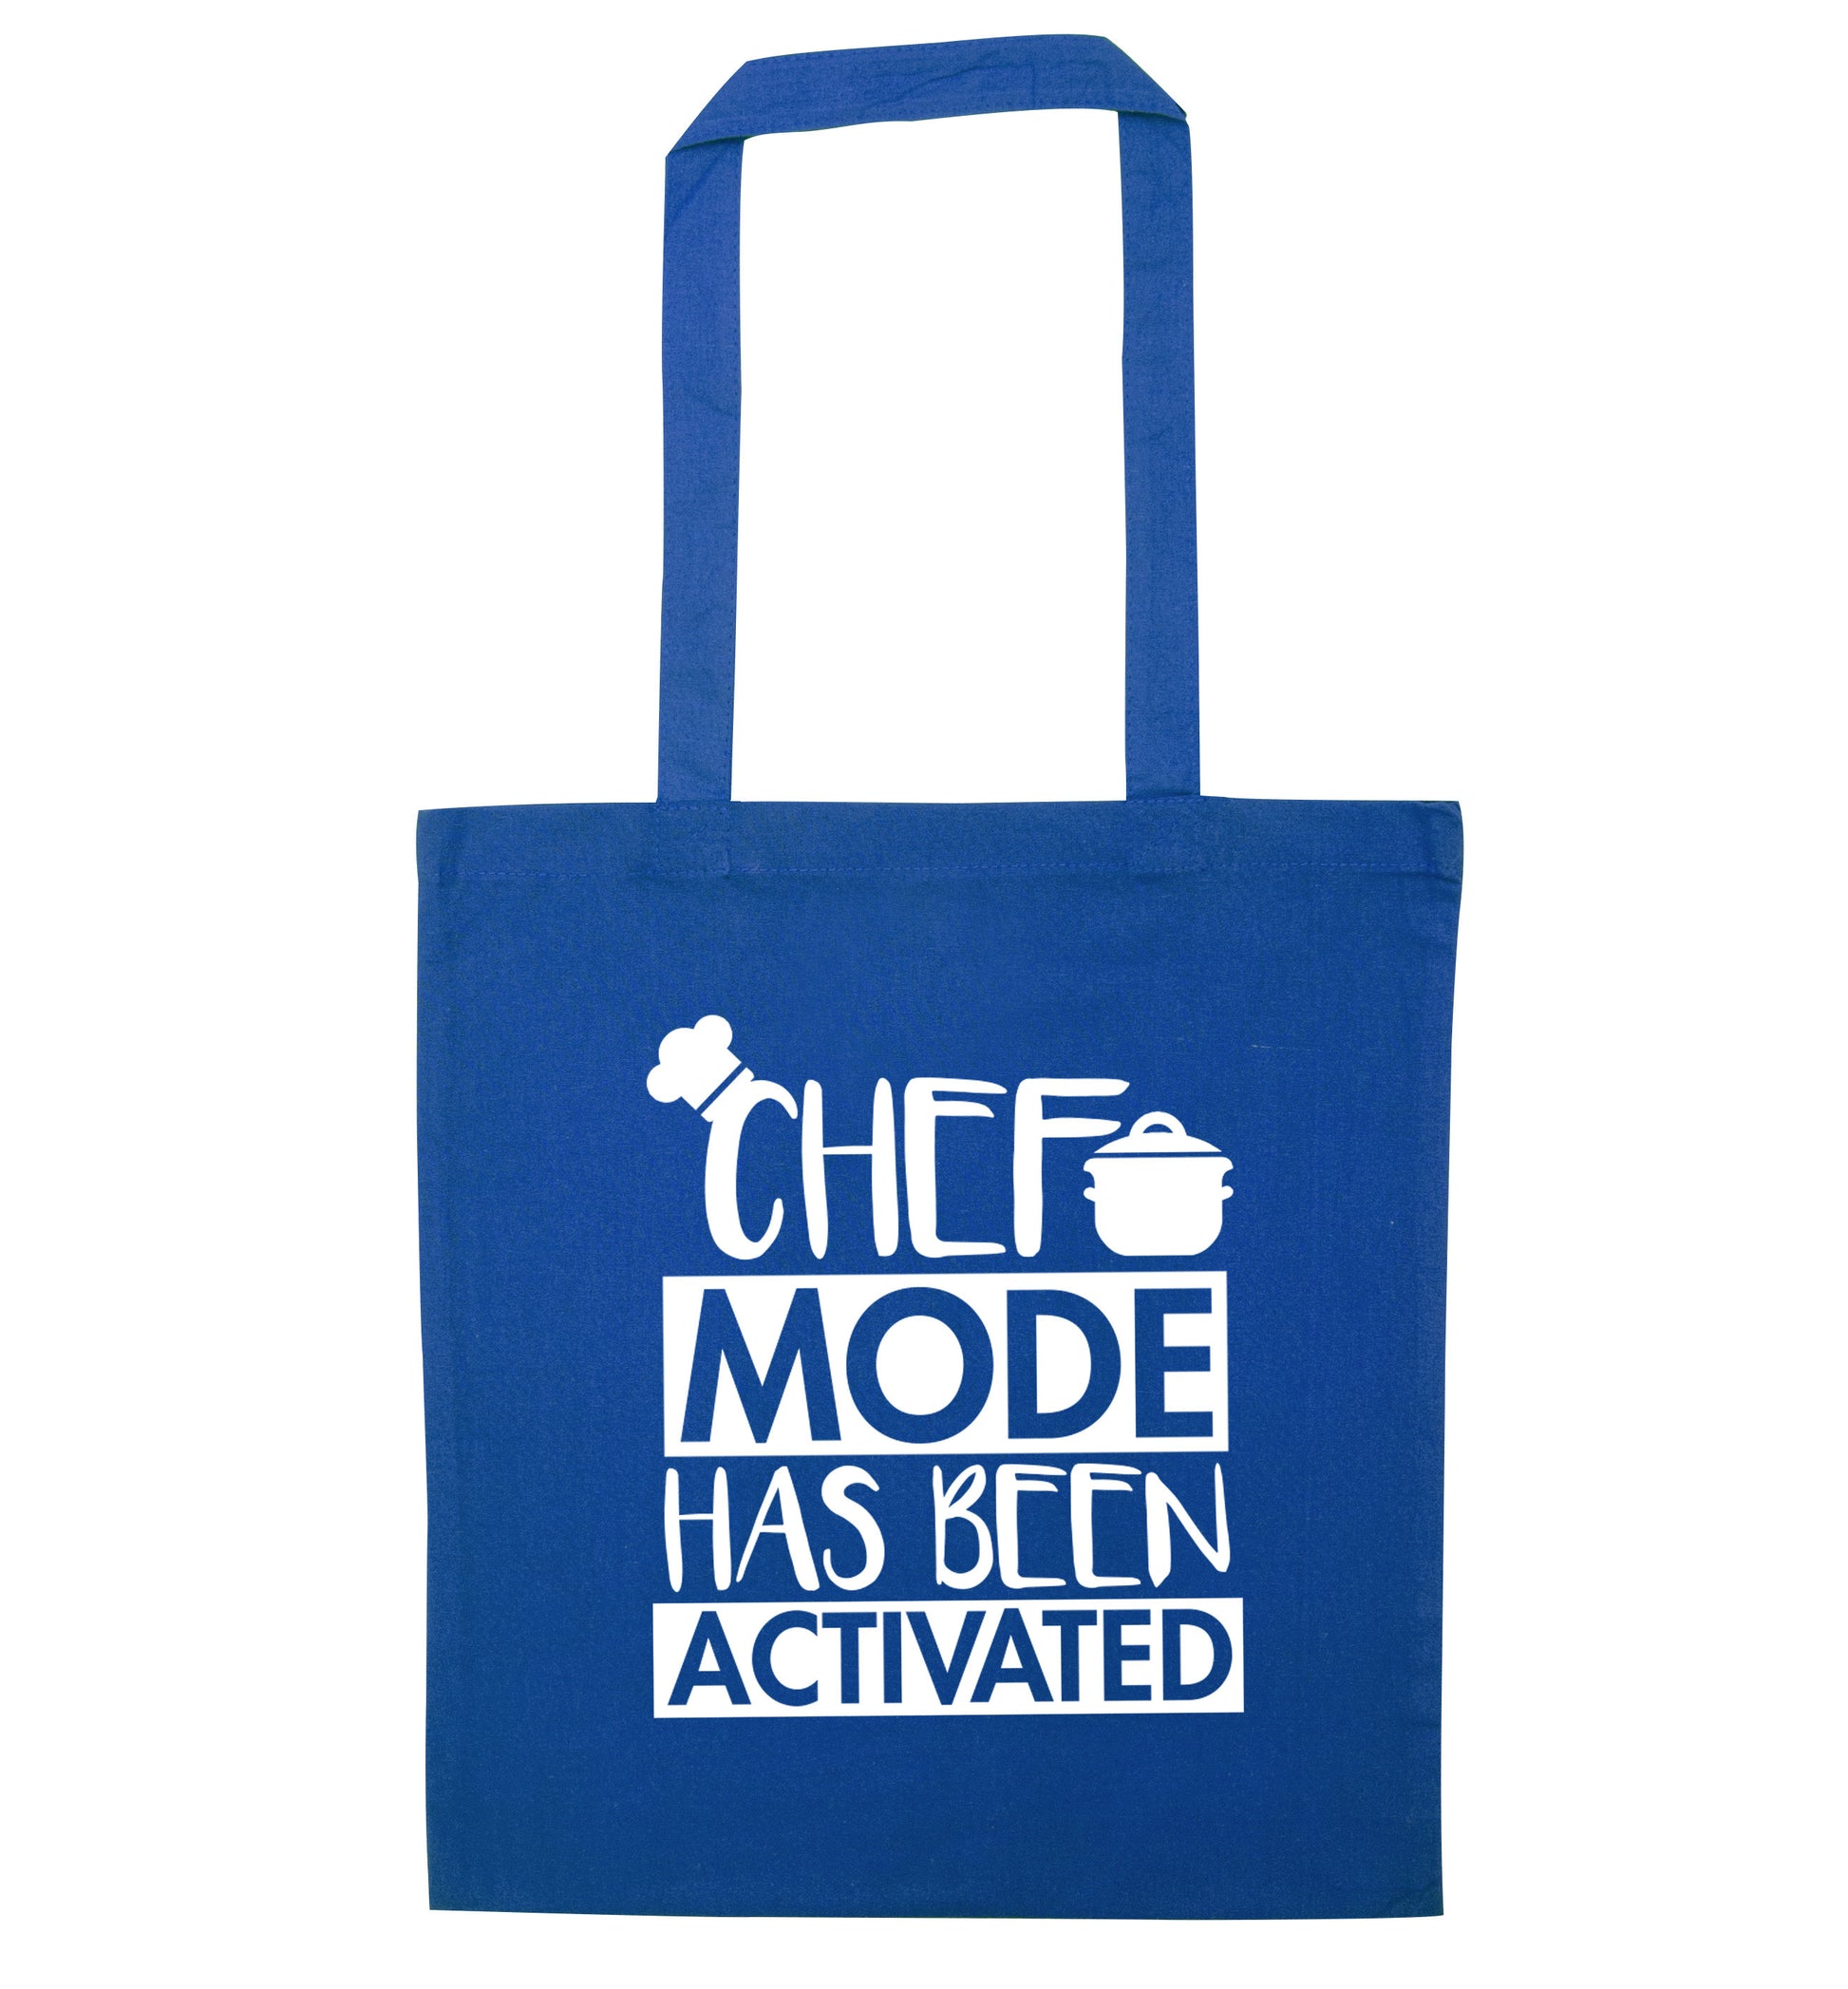 Chef mode has been activated blue tote bag